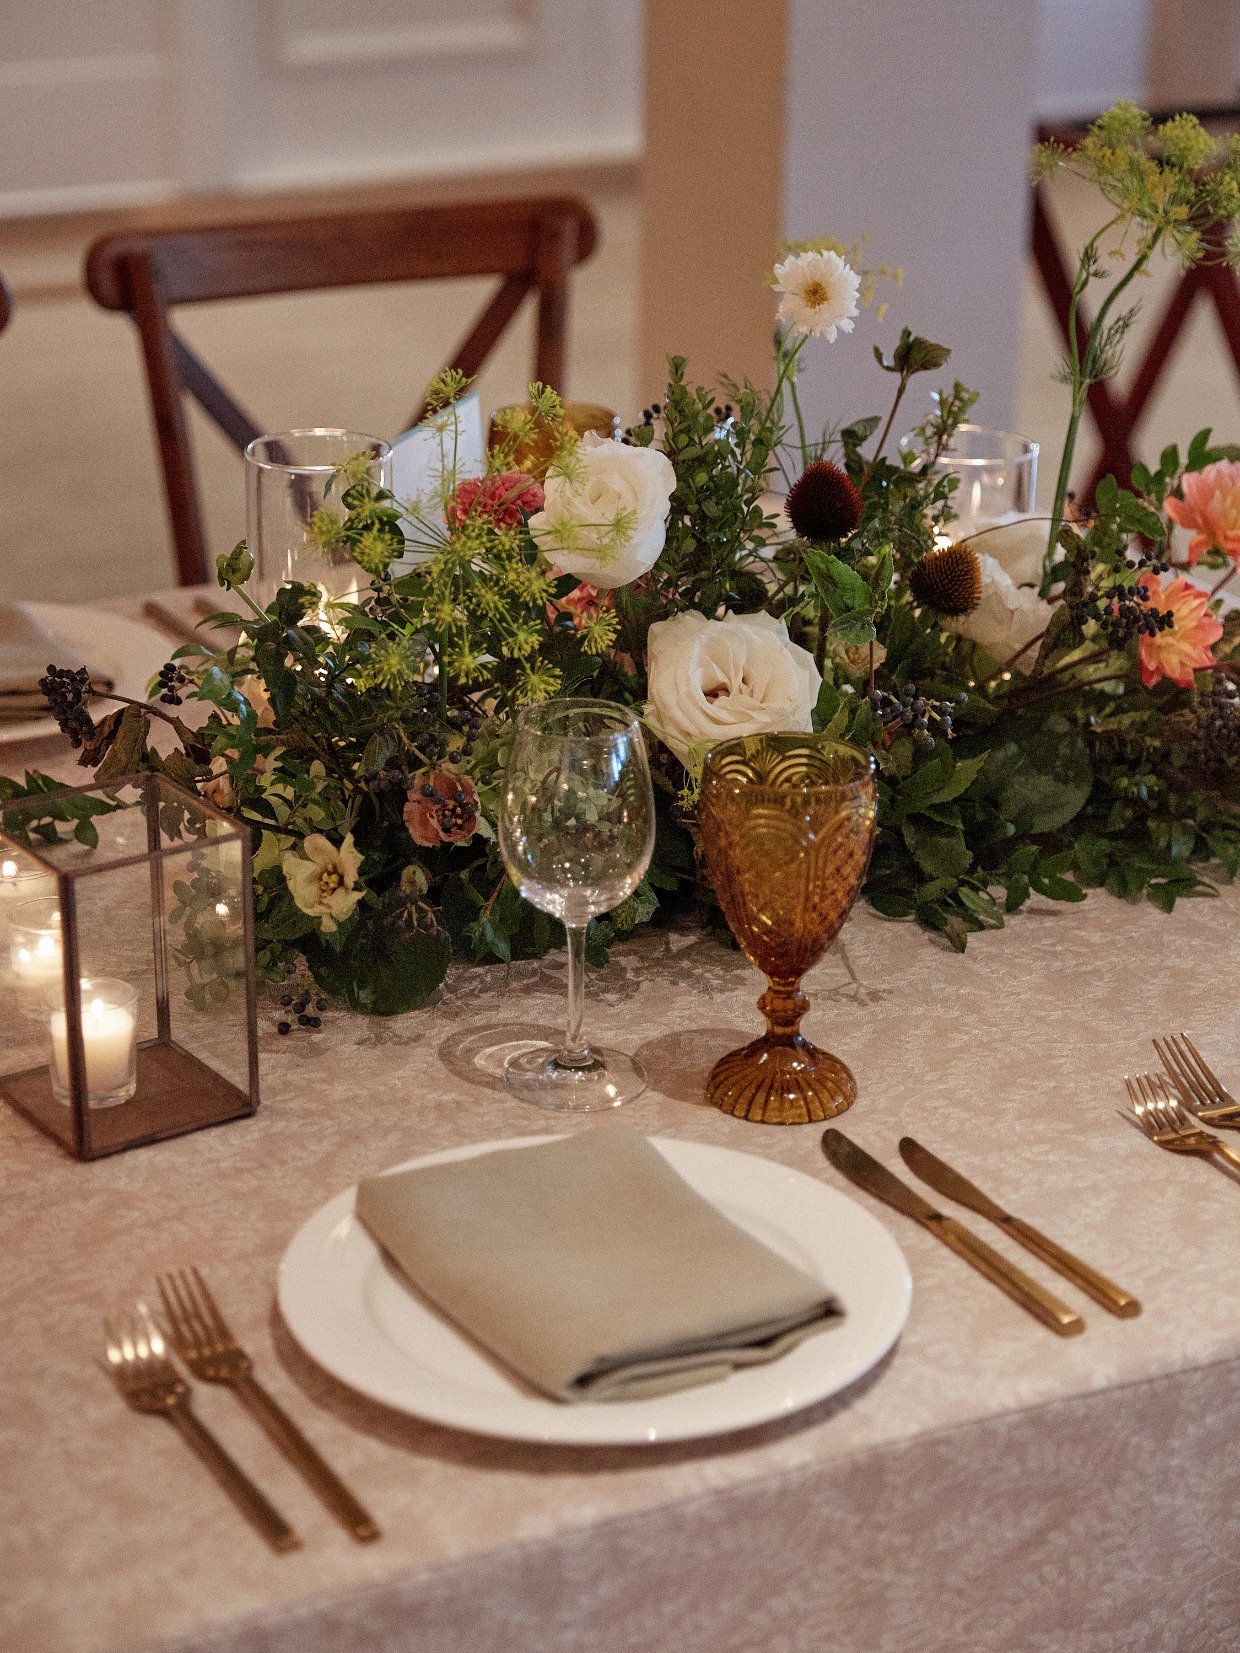 Reception centerpiece and place-setting